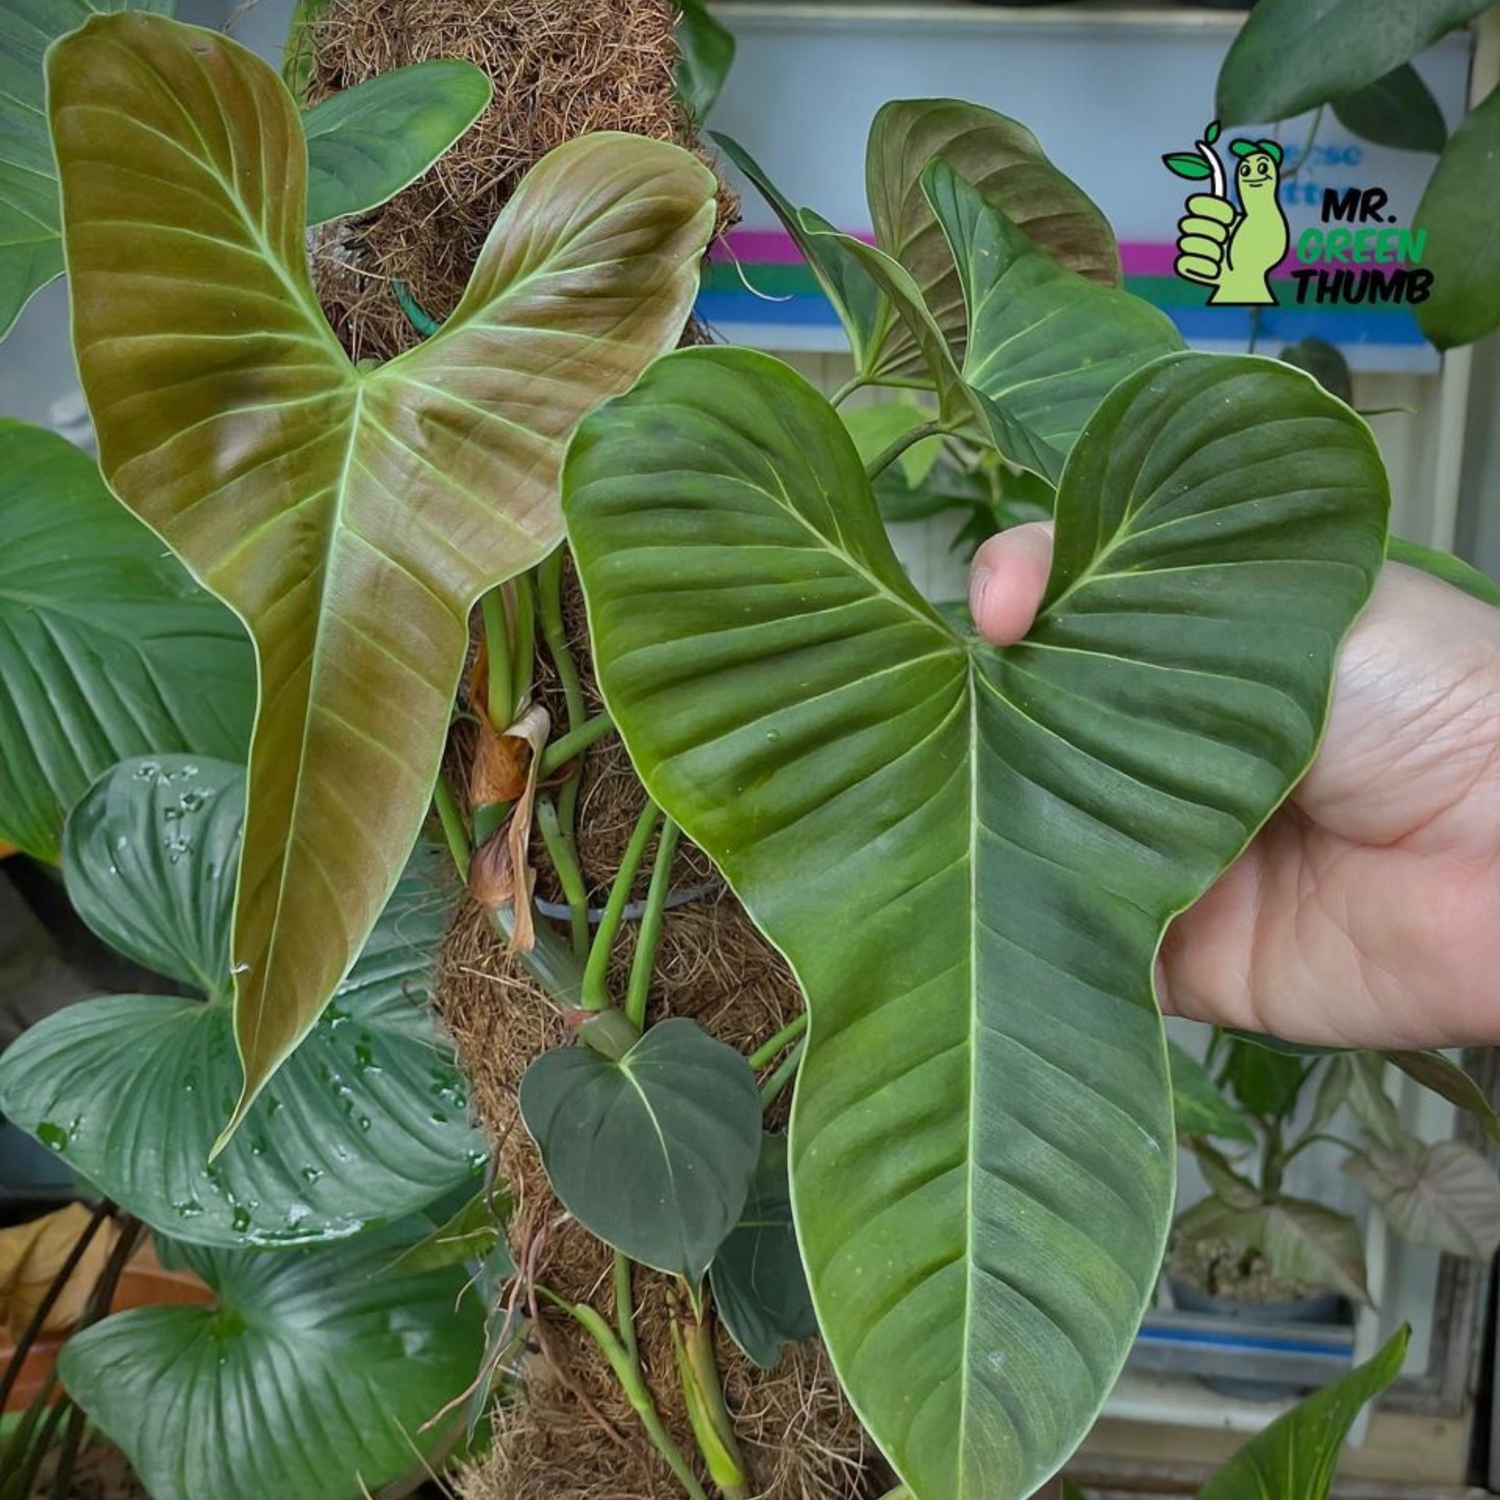 Philodendron lupinum - Tissue culture kit for sale in Perth Australia